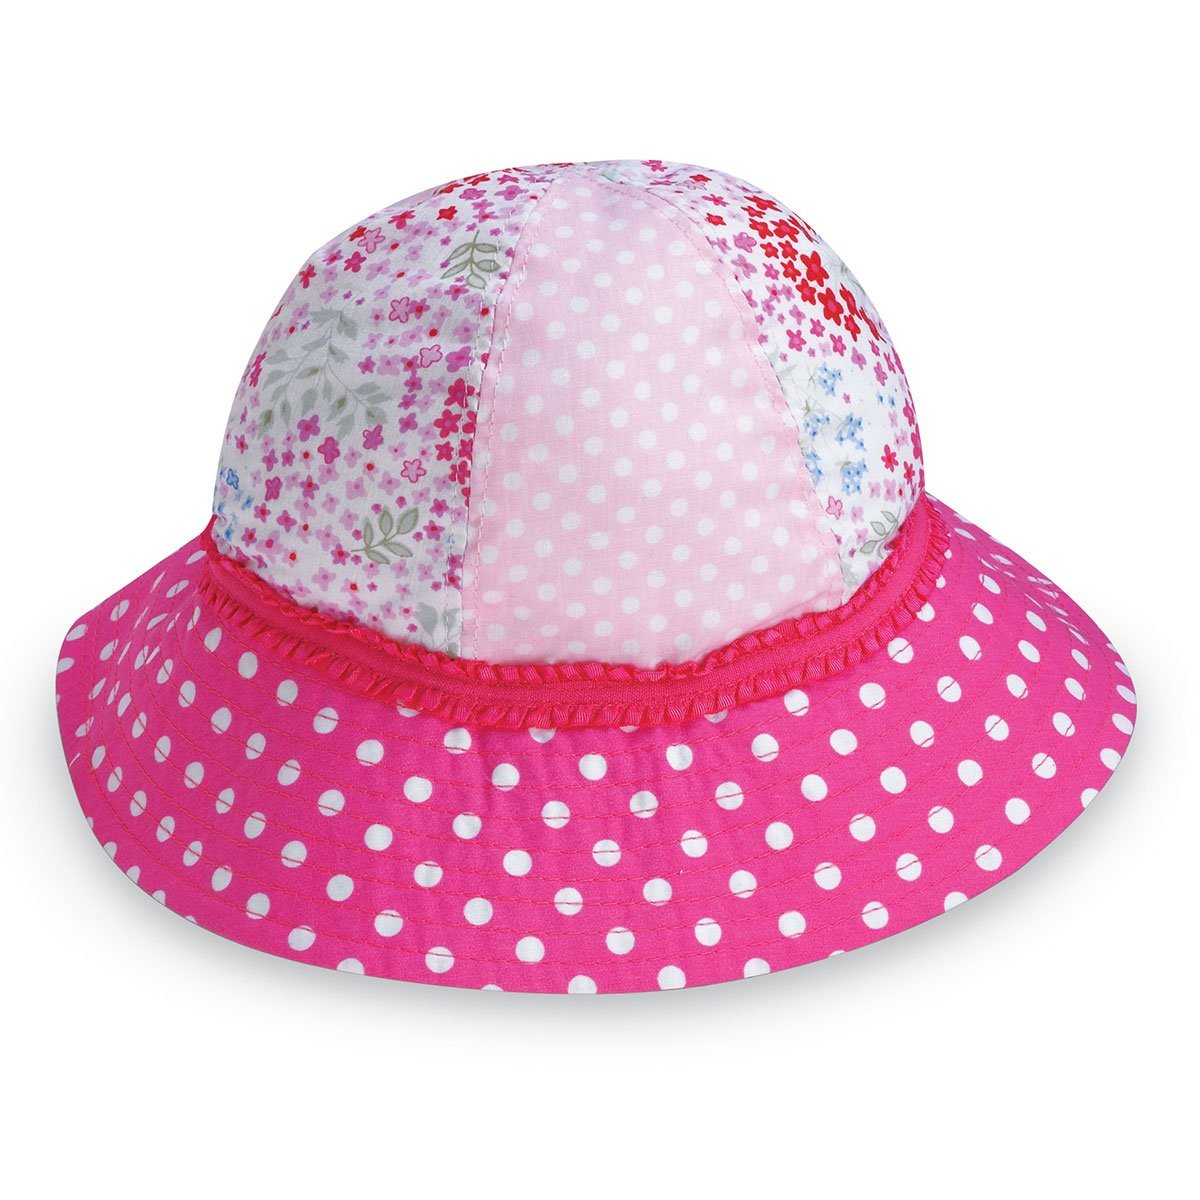 Featuring Kid's Packable and Bucket Style Platypus UPF Sun Hat with Chinstrap in Fuchsia Dots from Wallaroo